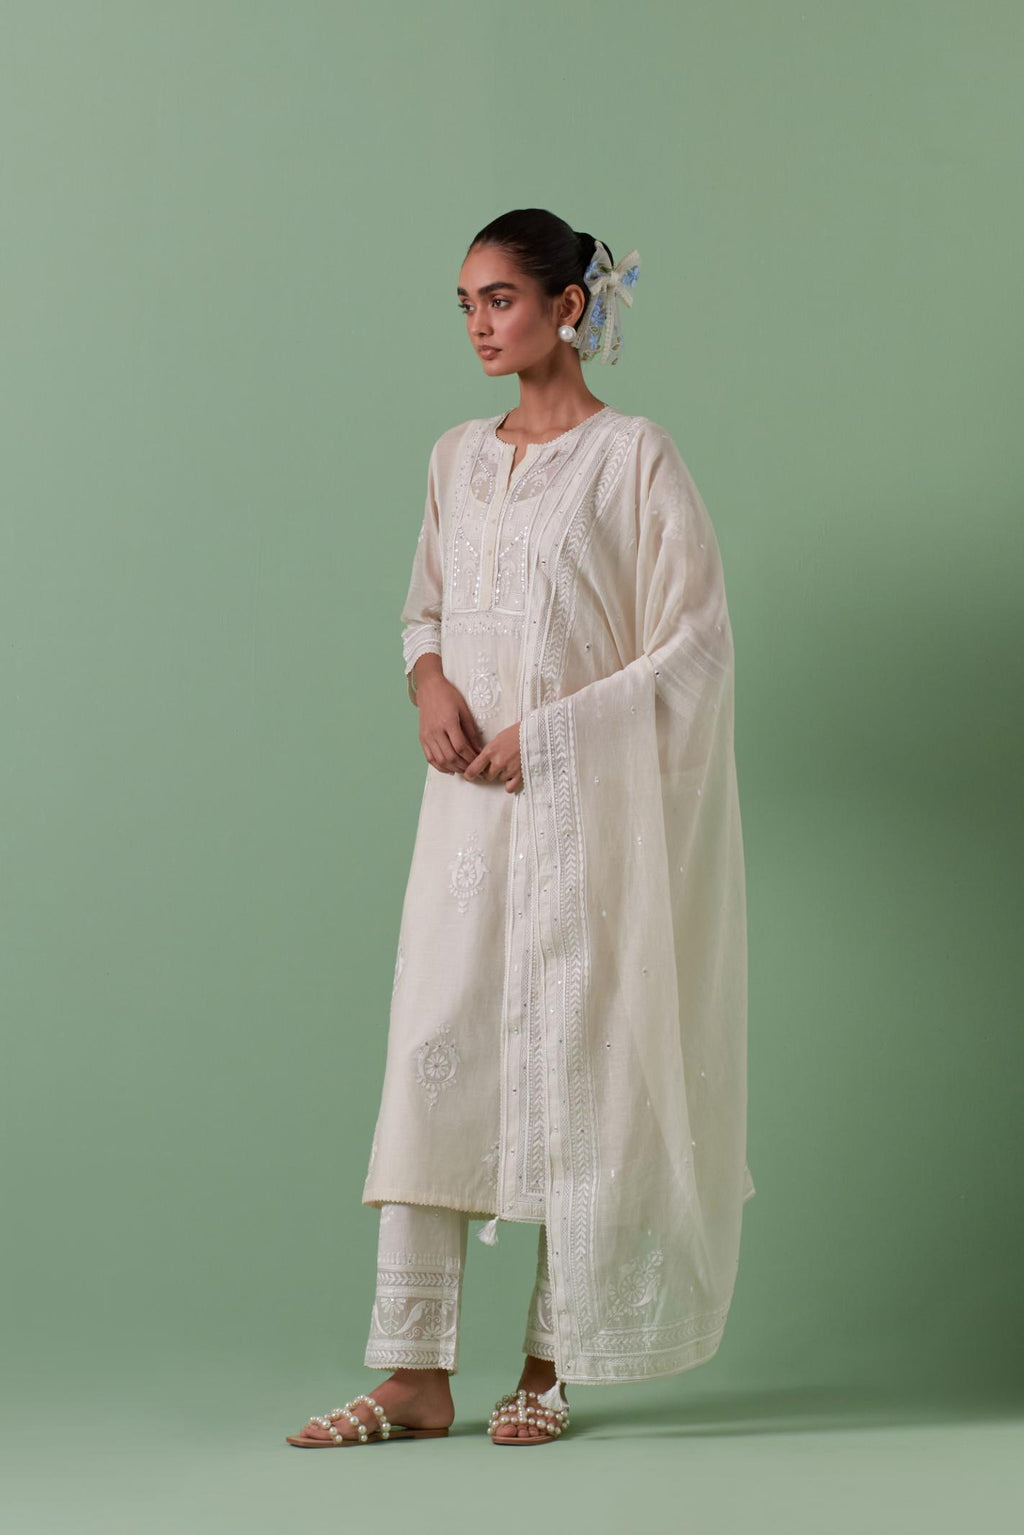 Off-white cotton chanderi dupatta with delicate silk thread embroidery, highlighted with braids, mirrors and sequins.